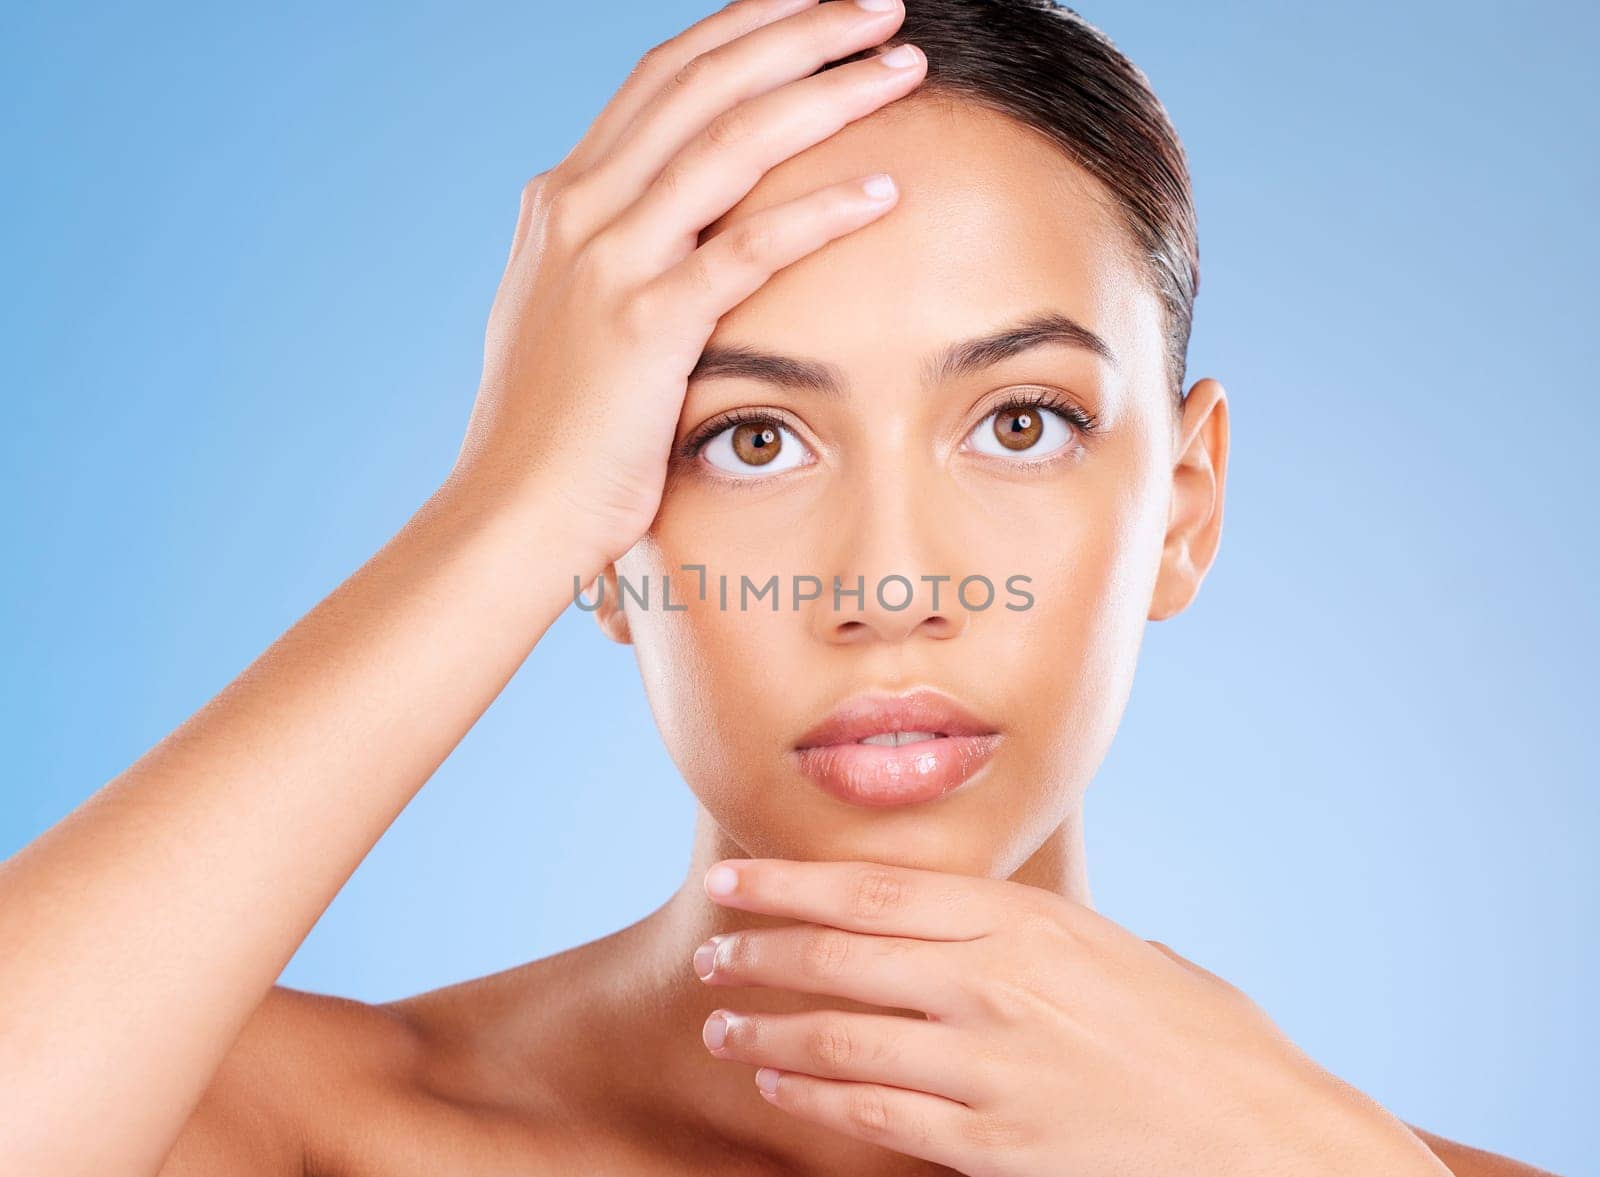 Portrait, skincare or model in studio after beauty or facial grooming routine on a blue background with mockup space. Luxury, healthy girl or beautiful woman touching face for self love or self care.